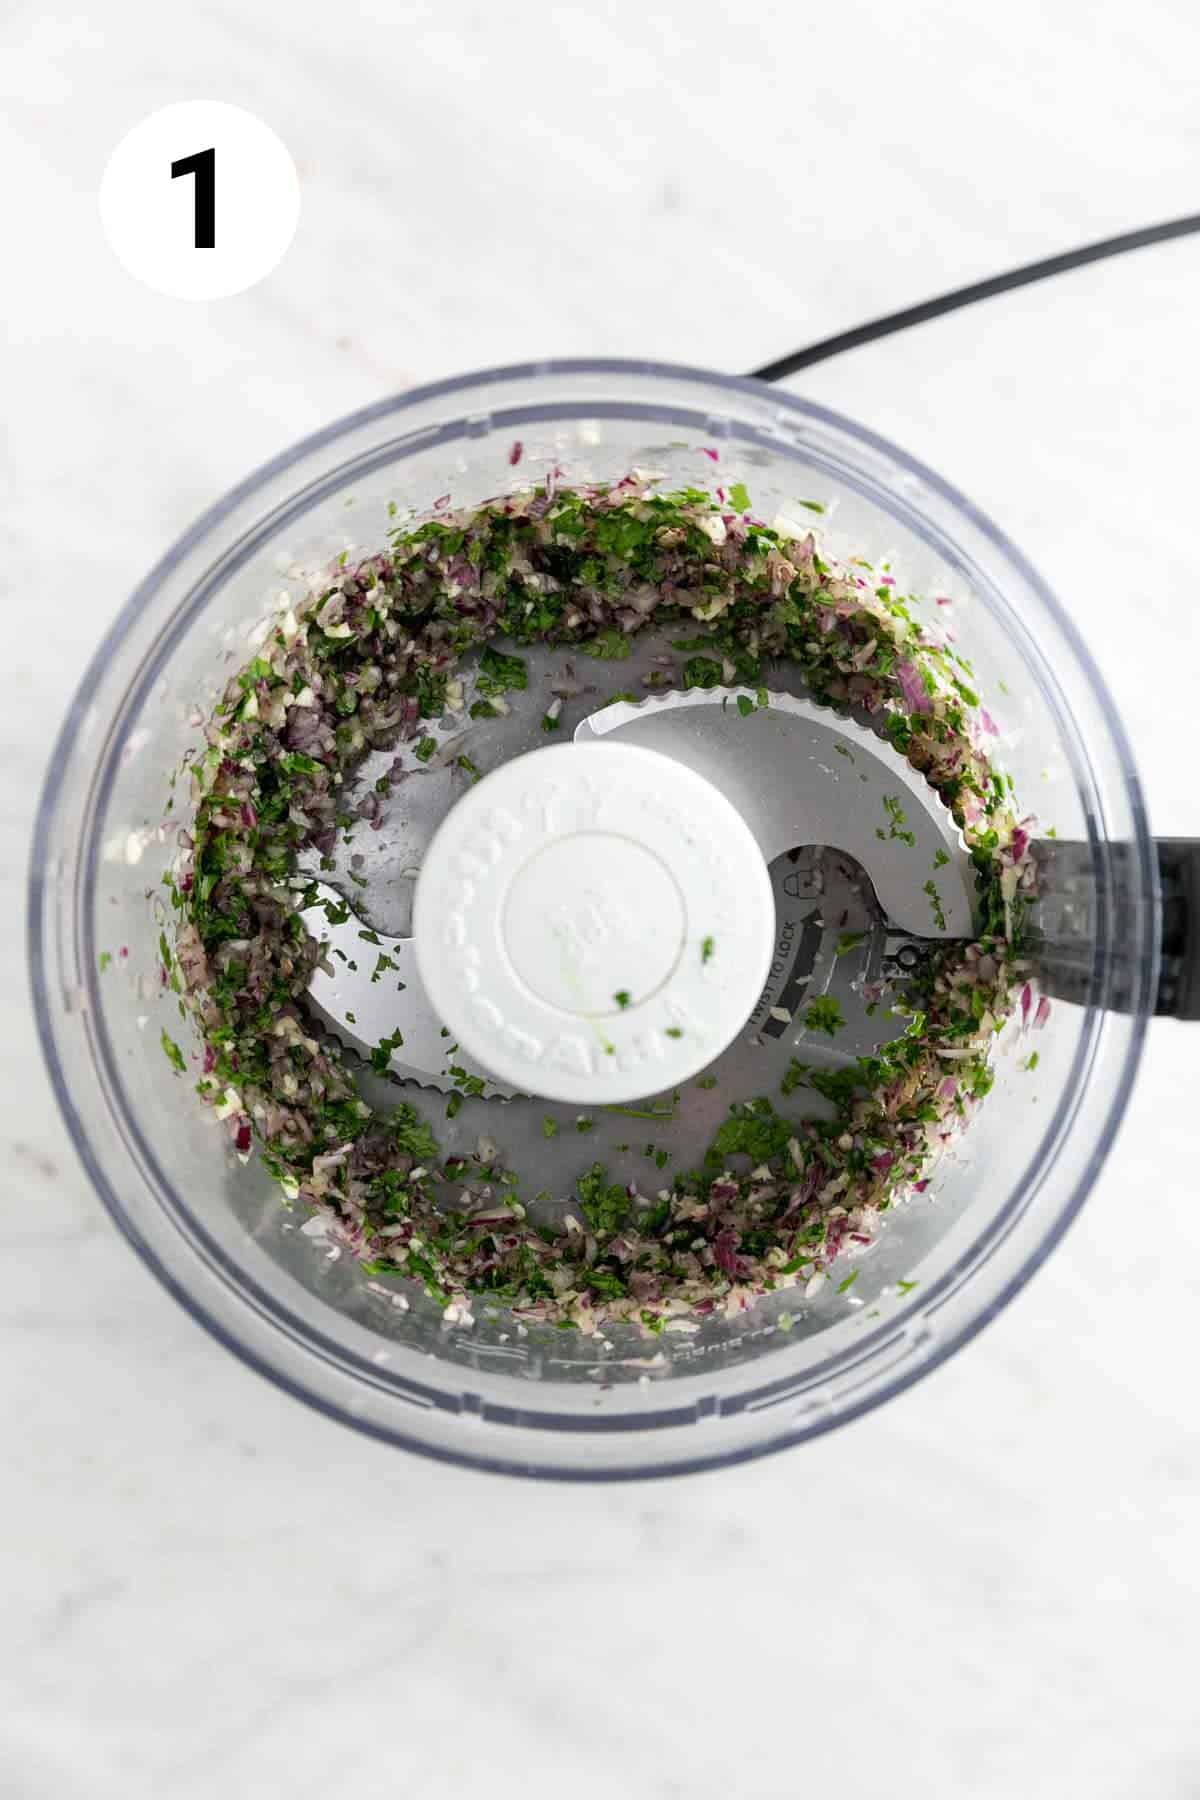 Garlic, red onion, and cilantro finely chopped in a food processor.